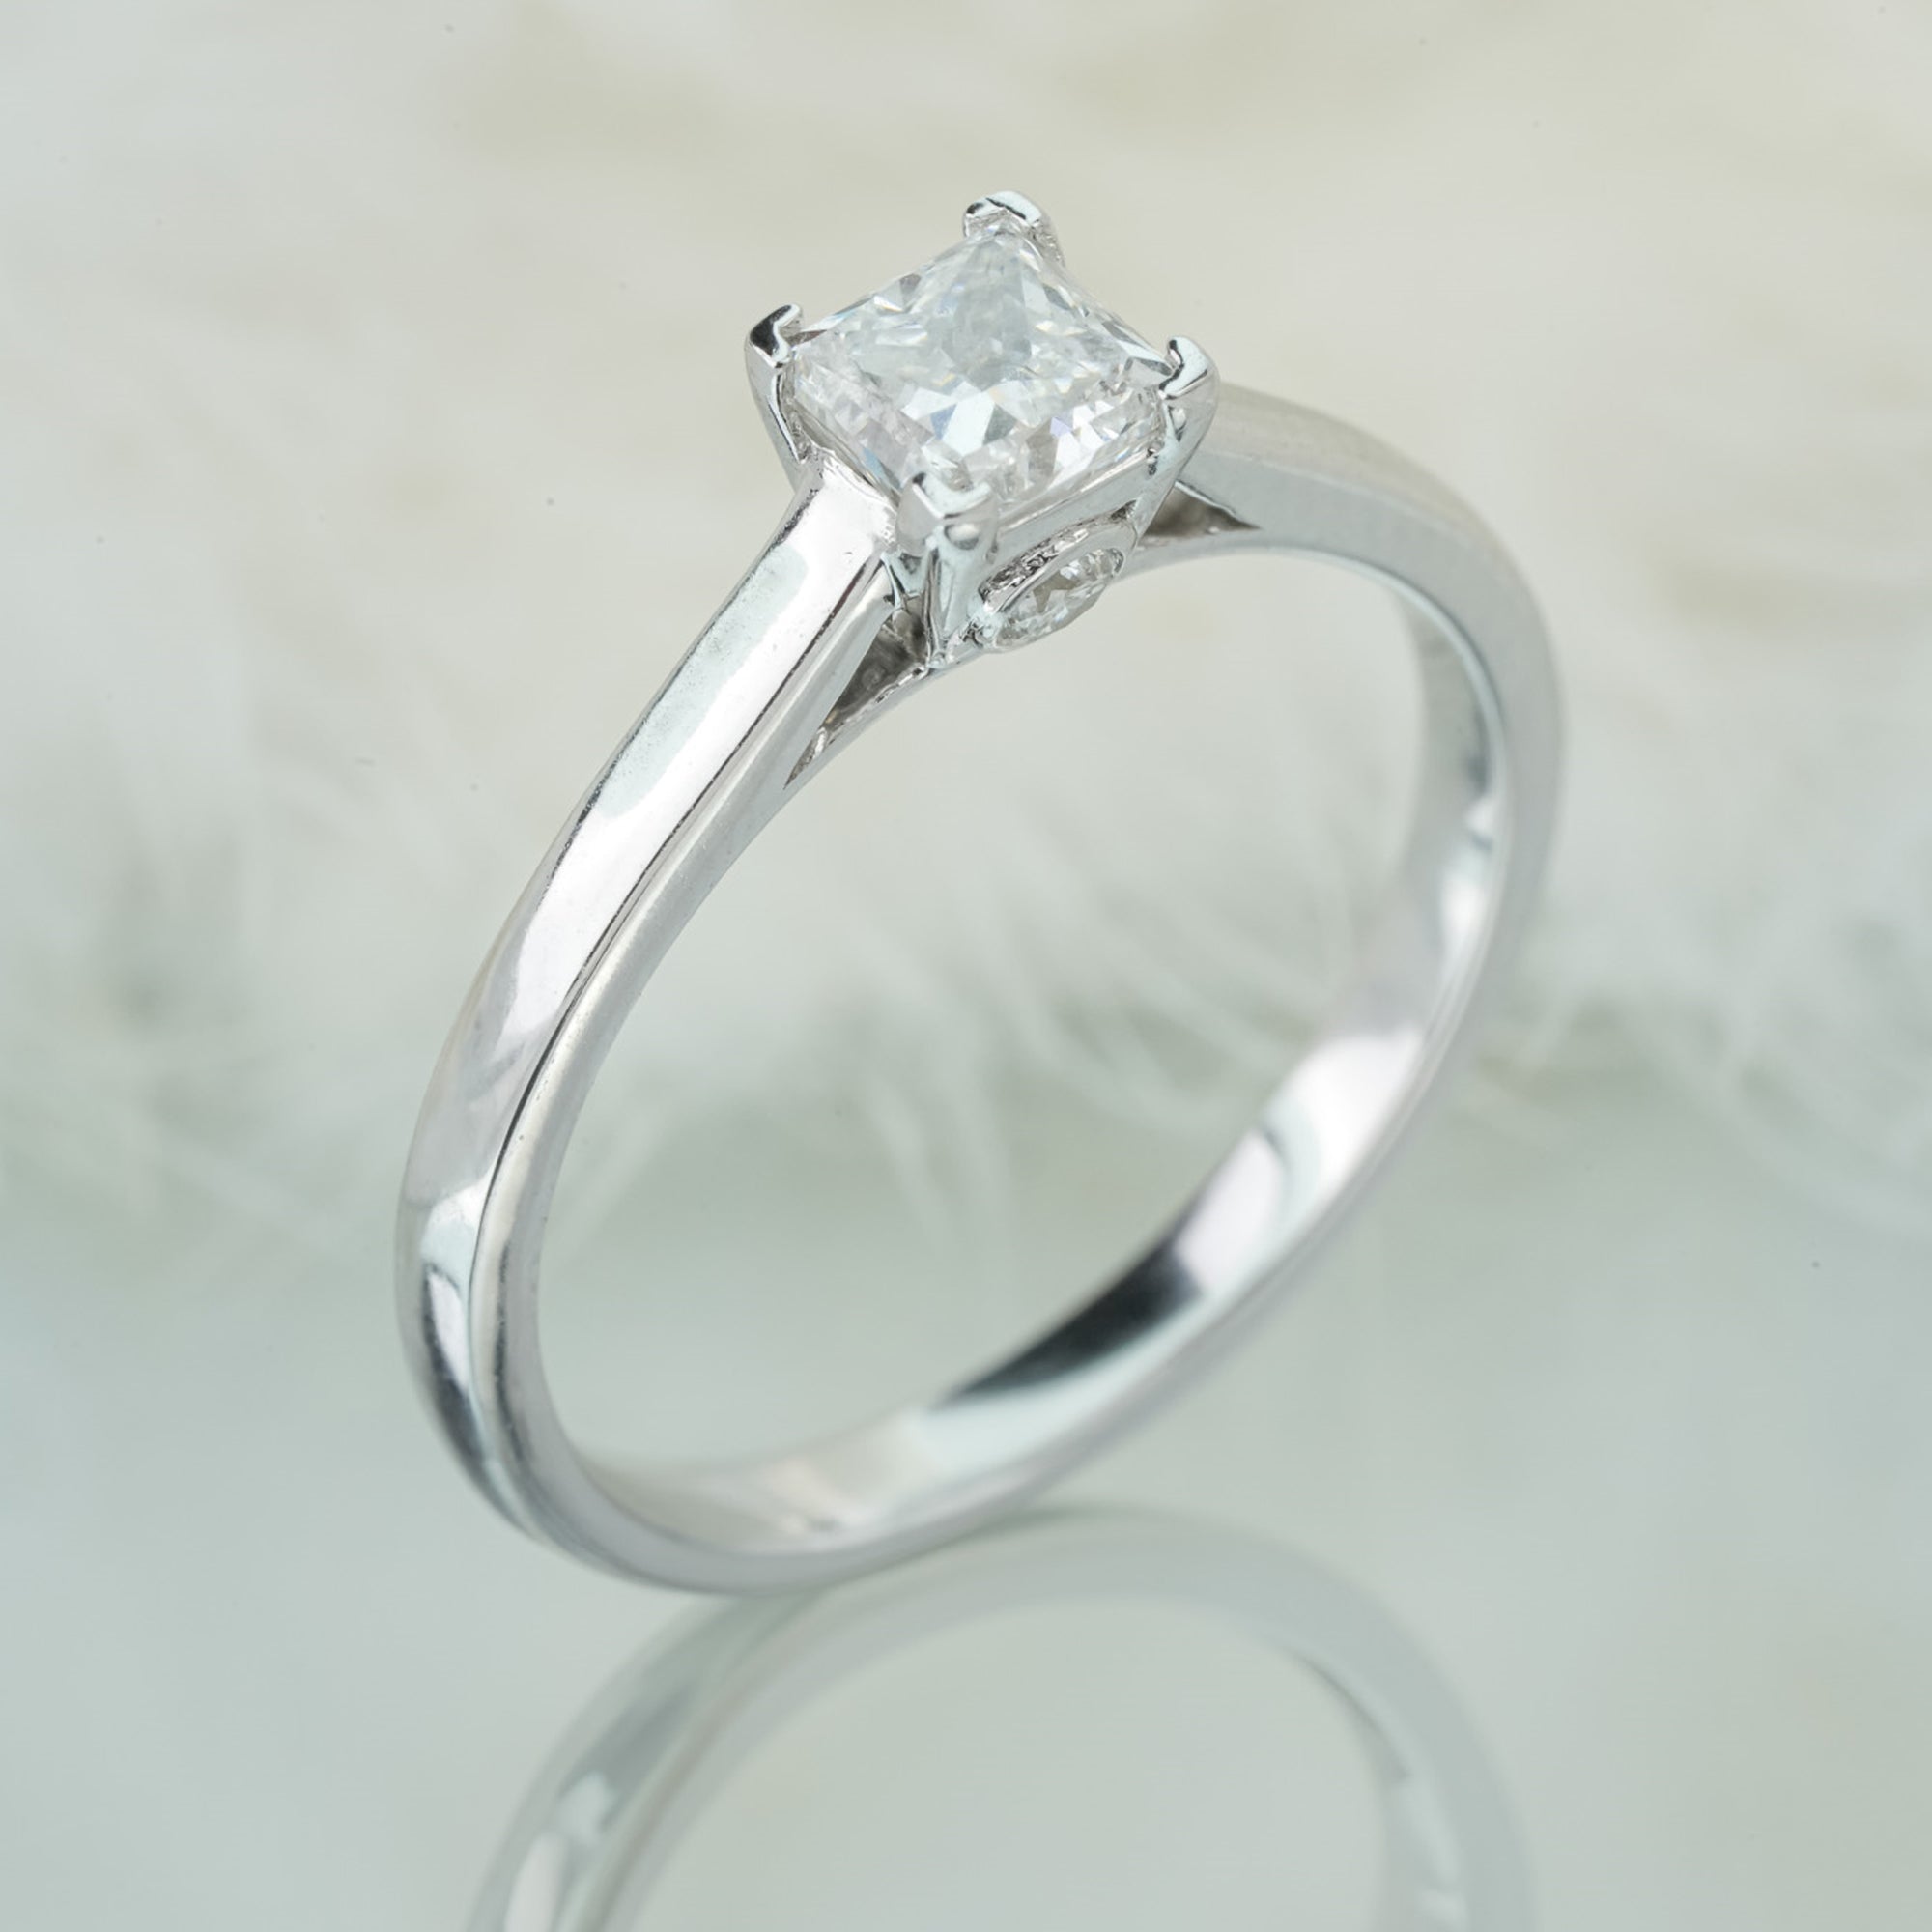 Princess Cut Solitaire Lab Grown Diamond Ring in 14 Kt White Gold 